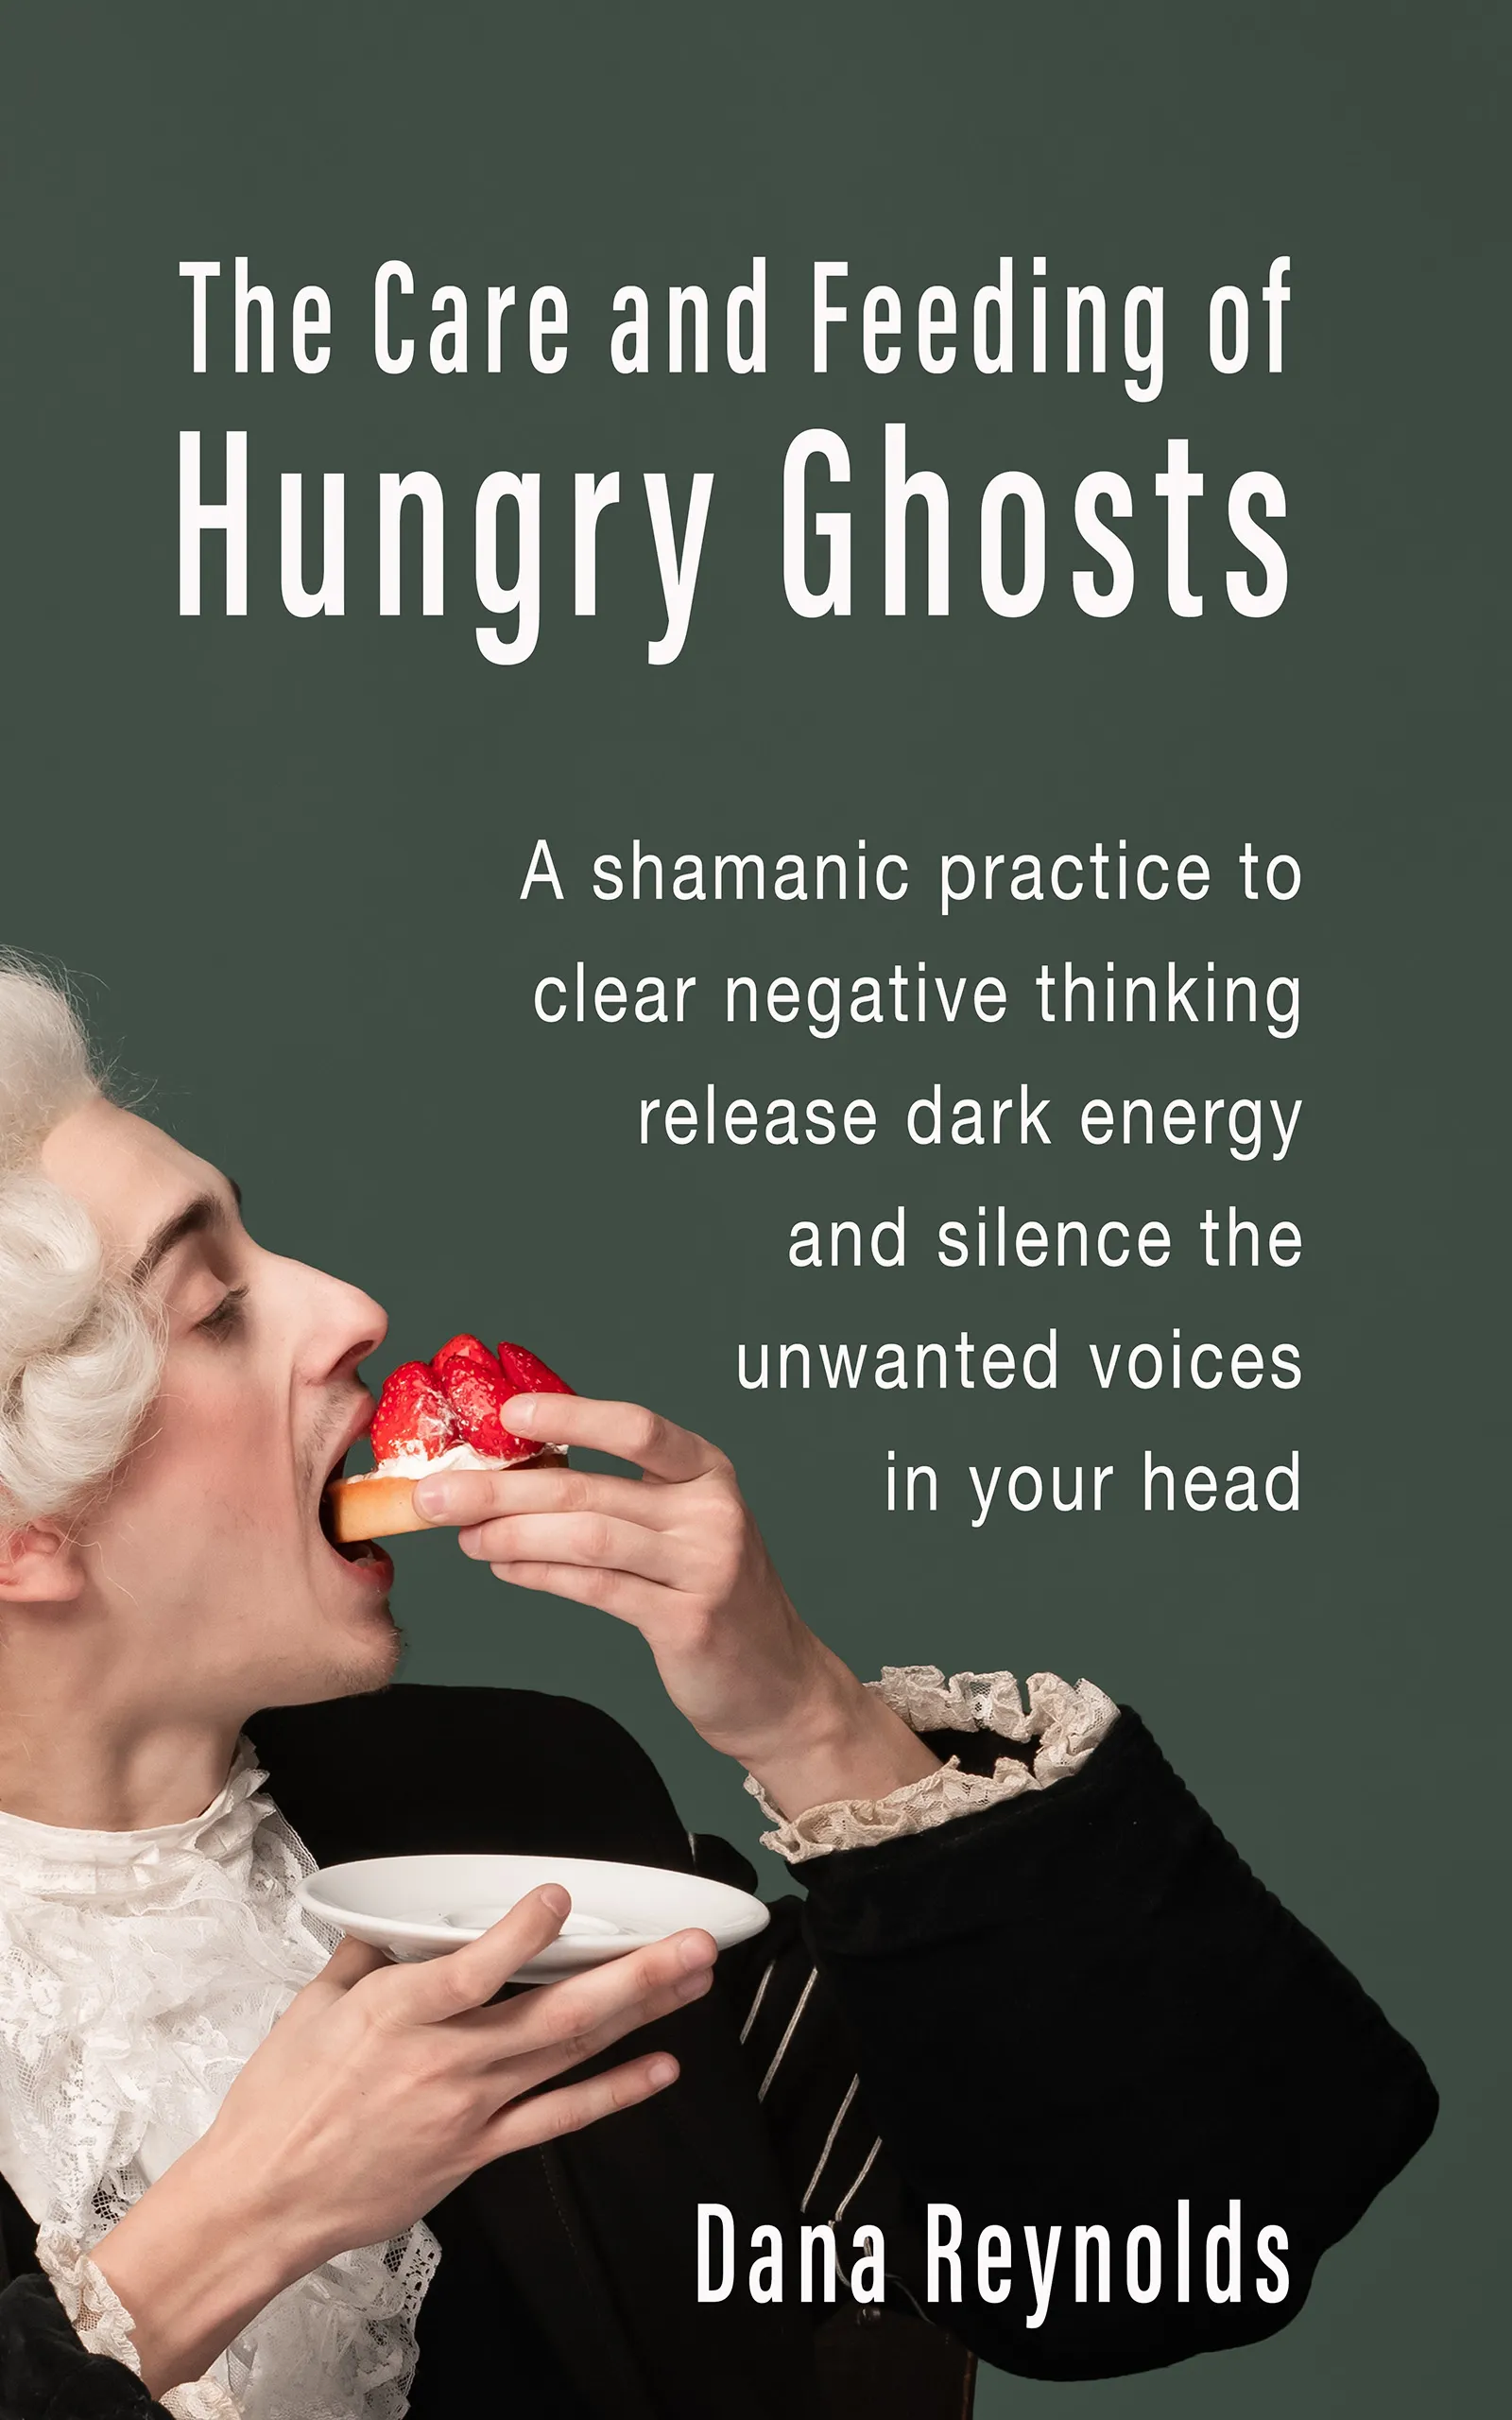 The Care and Feeding of Hungry Ghosts book cover